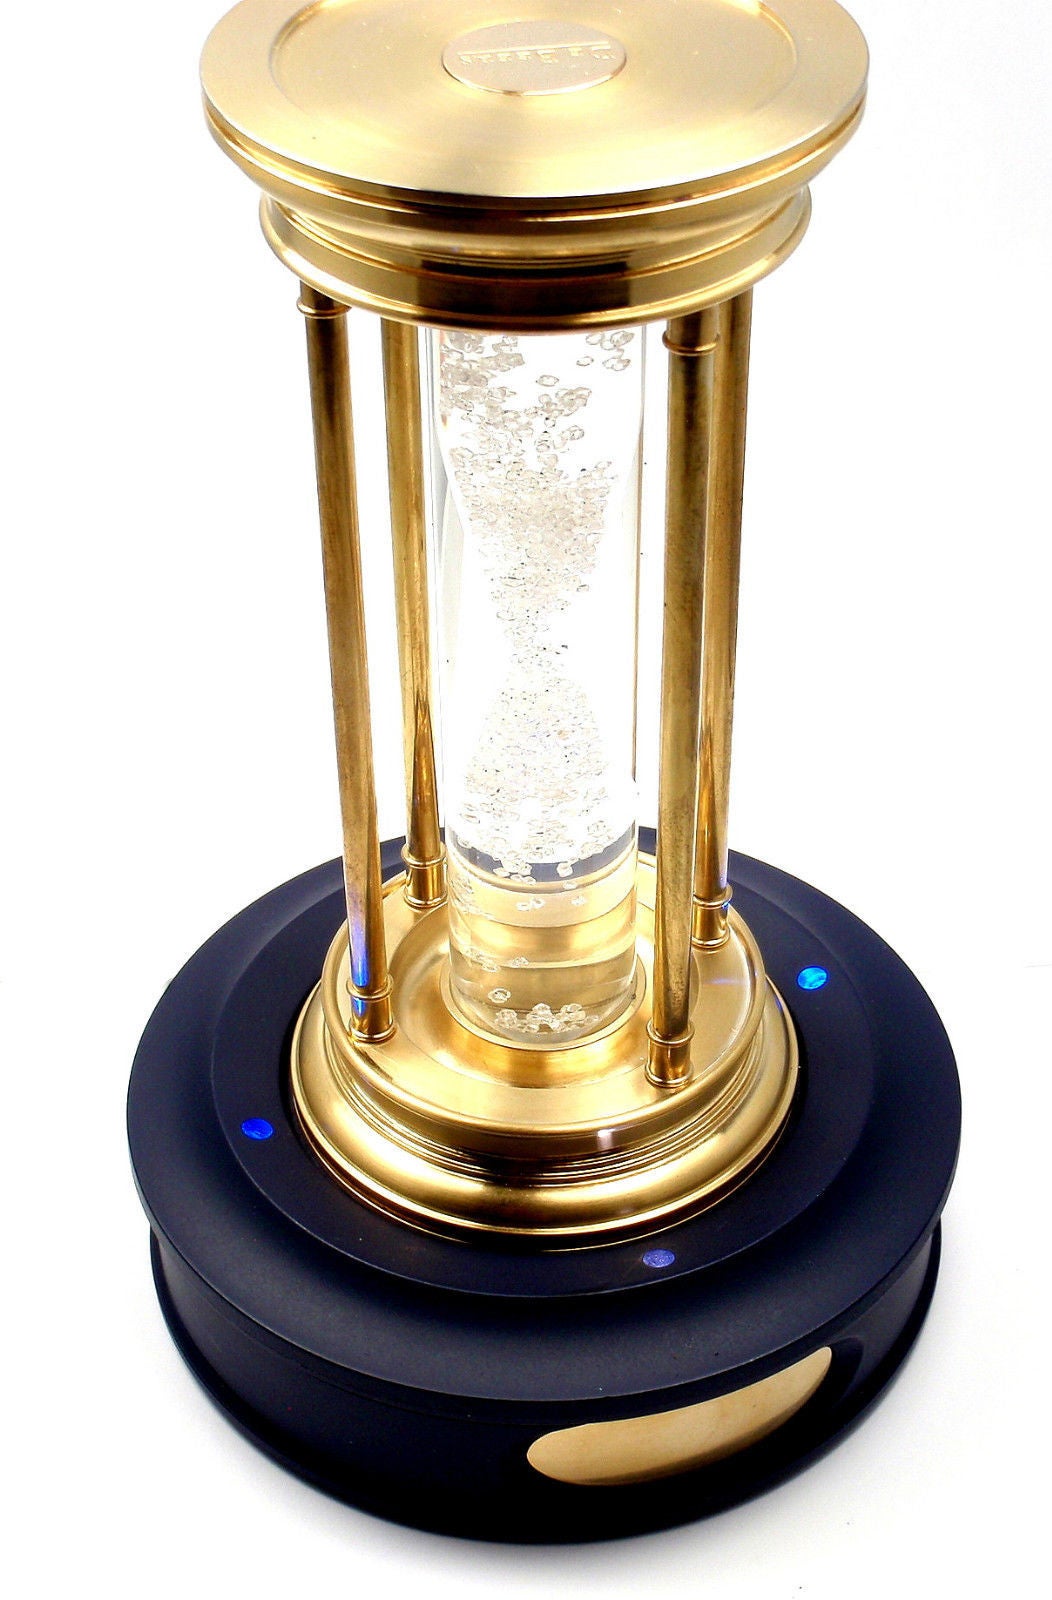 Very Rare! Limited Edition Millennium 2000 Diamond Brass Hourglass Timer  by De Beers.
This item comes with lighted pedestal and a box.

This hourglass was just sold on June 3, 2015 at Christies for $41,285.

Containing a cascade of over 2000